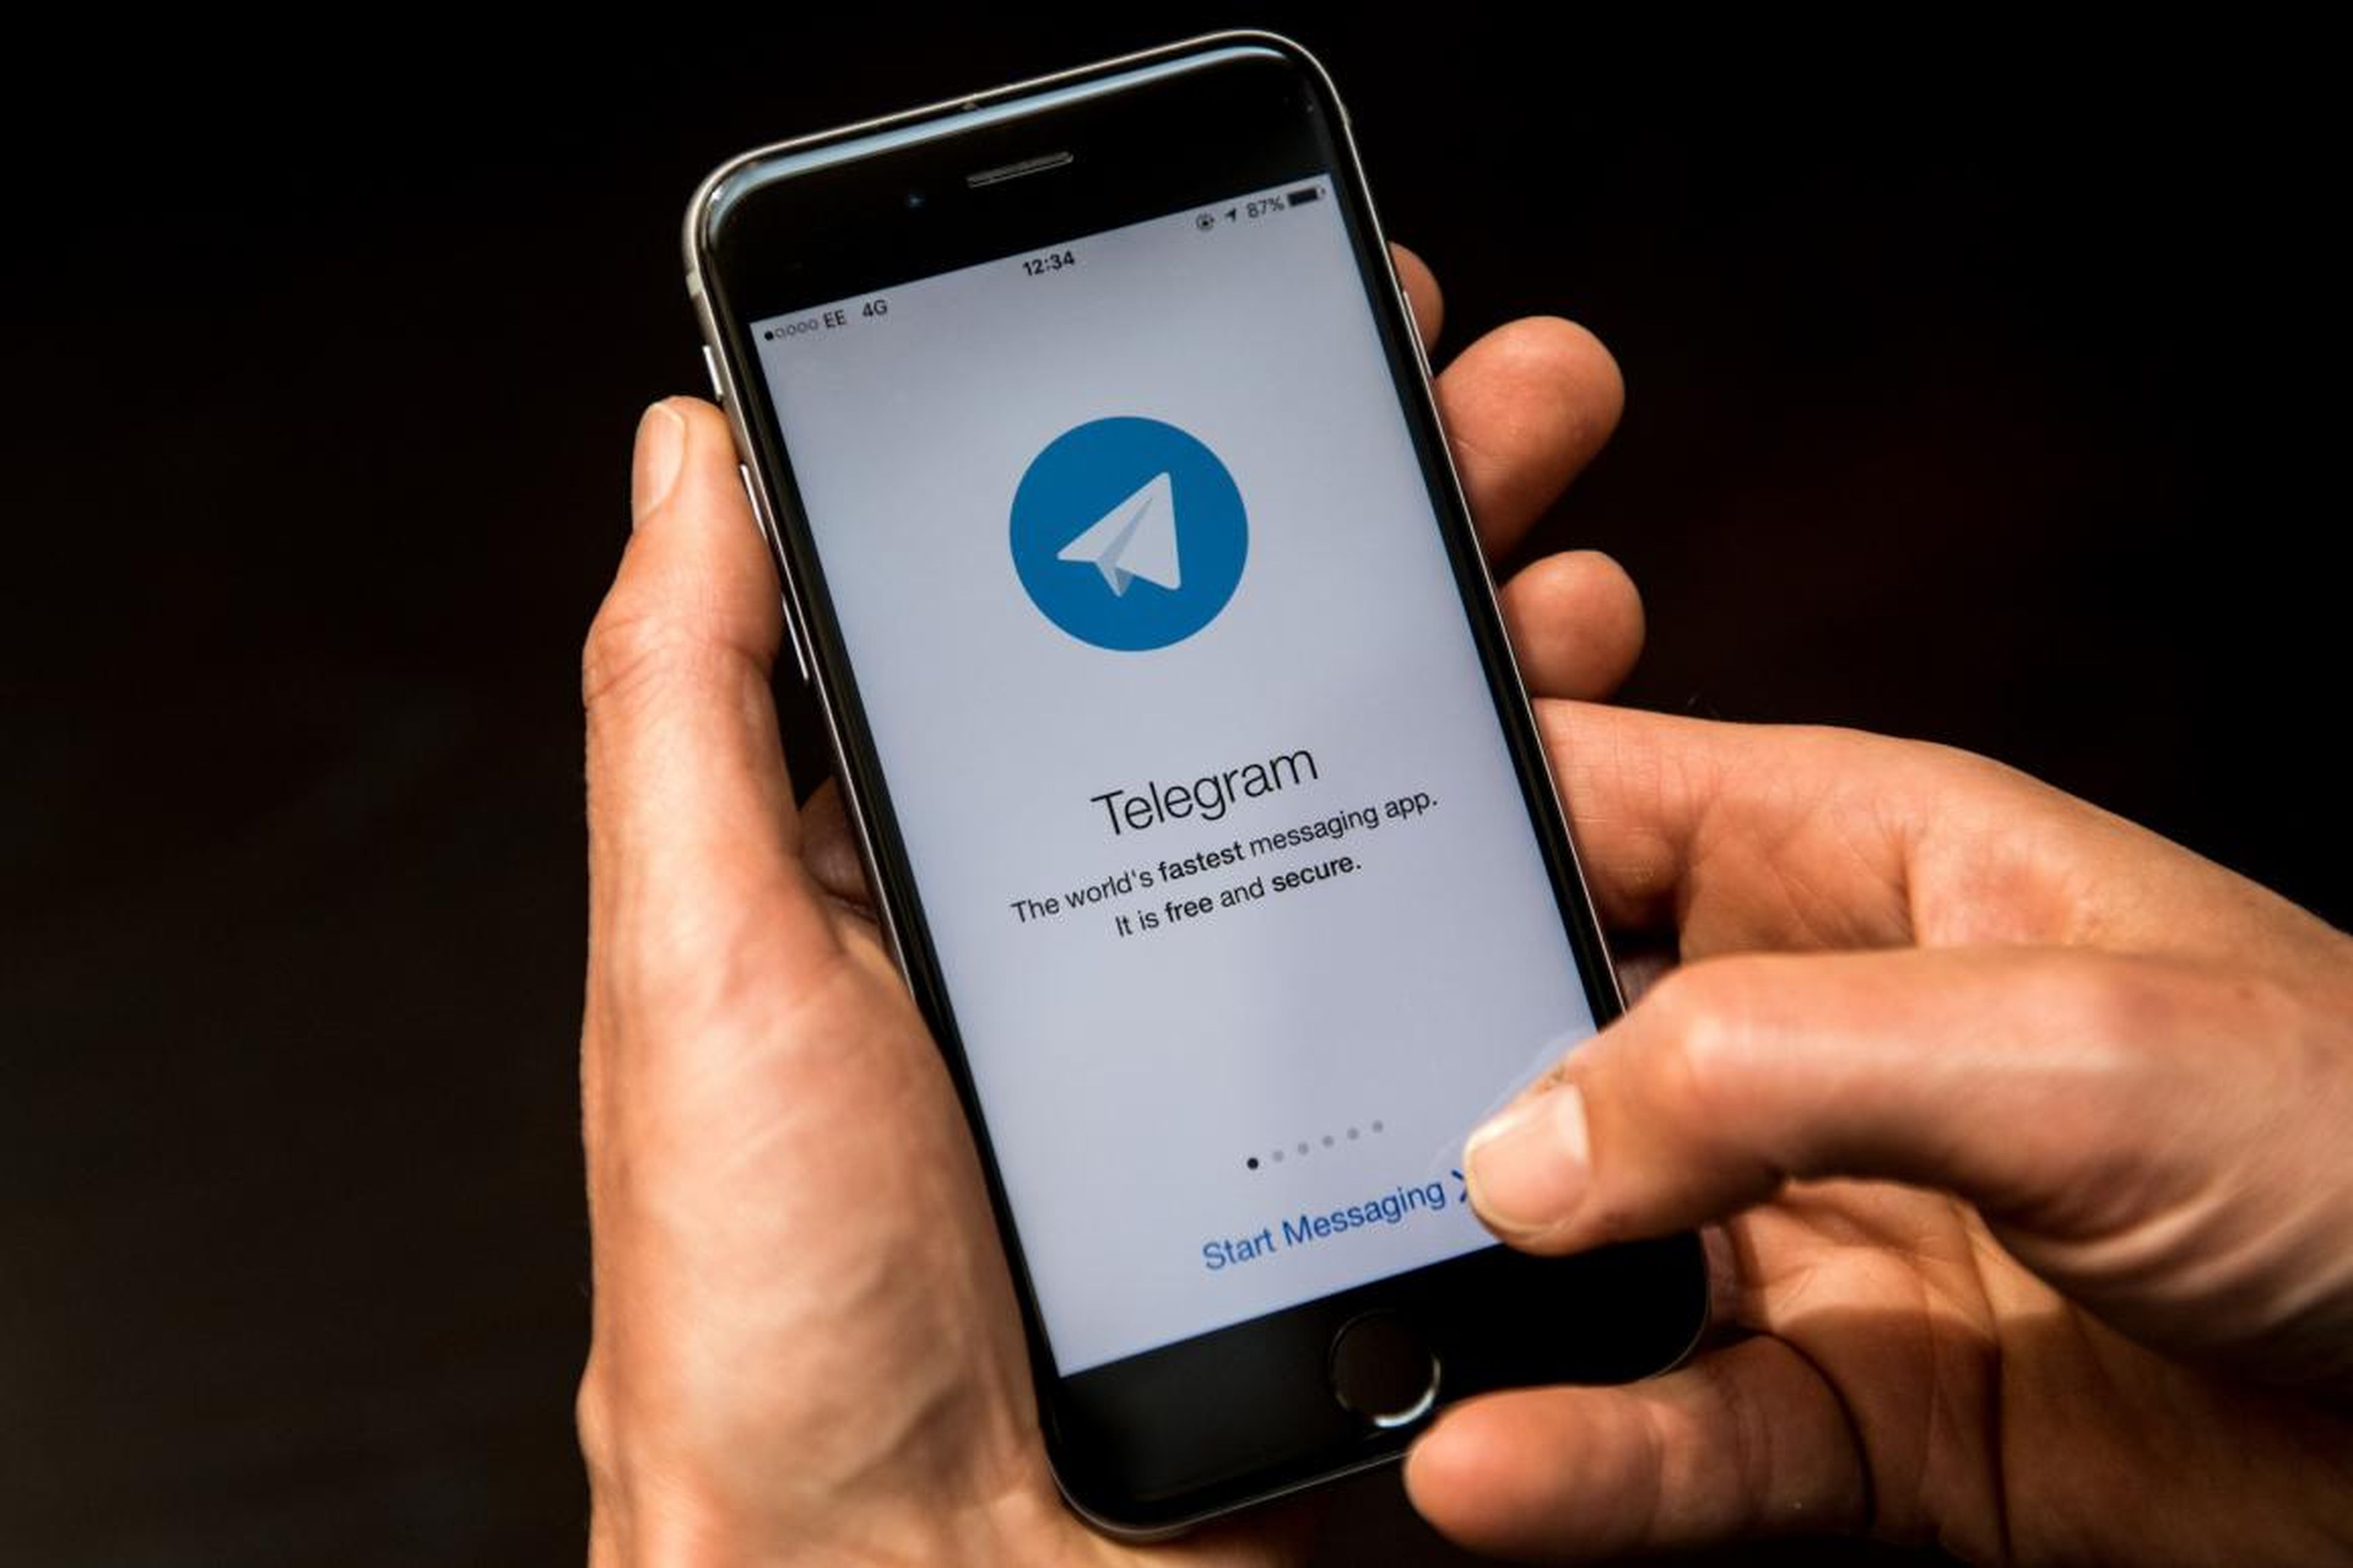 Try Telegram instead of Google Hangouts when it comes to chat.